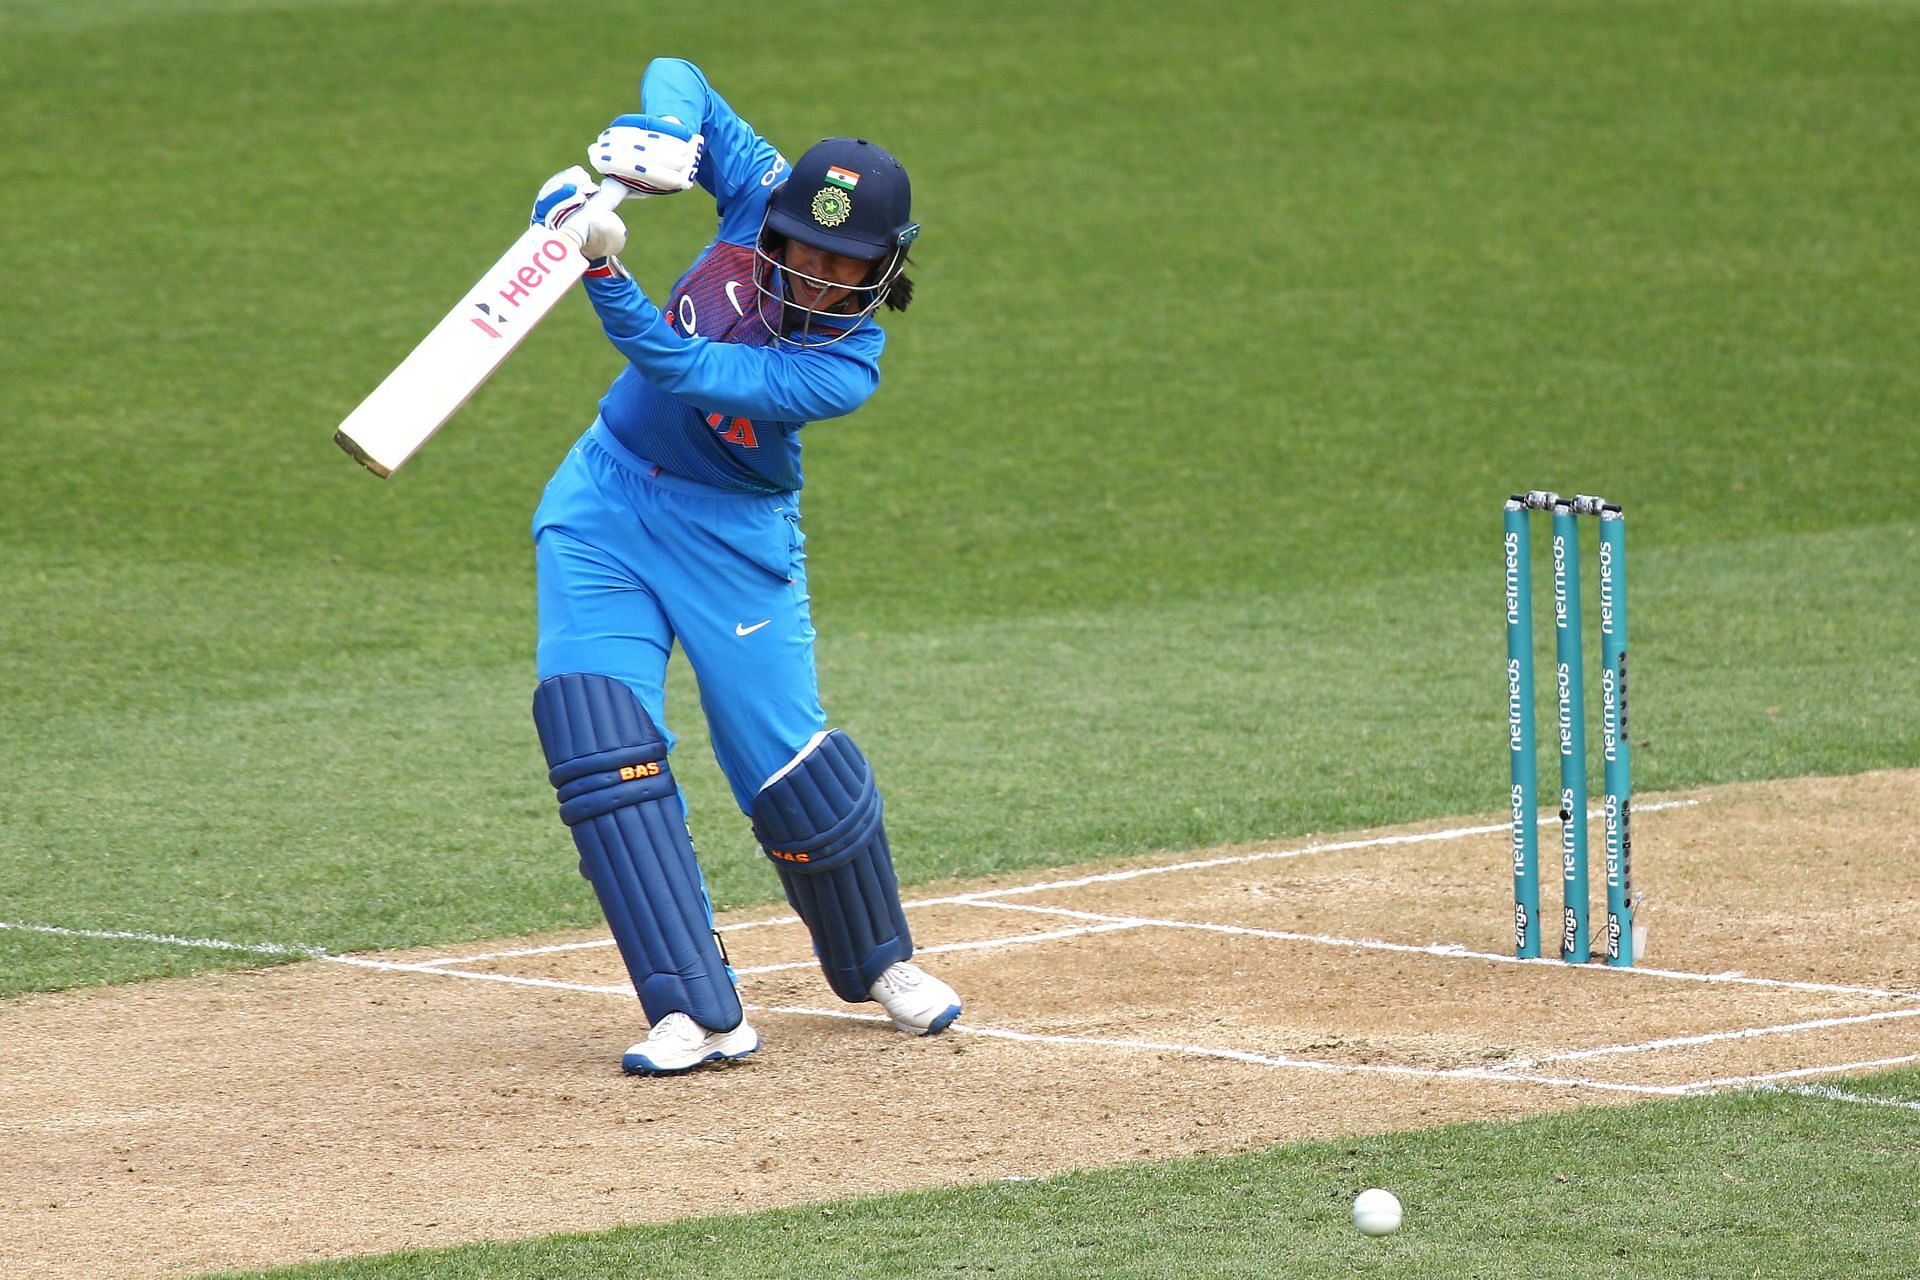 New Zealand v India - T20 Game 1 (Image source: Getty)